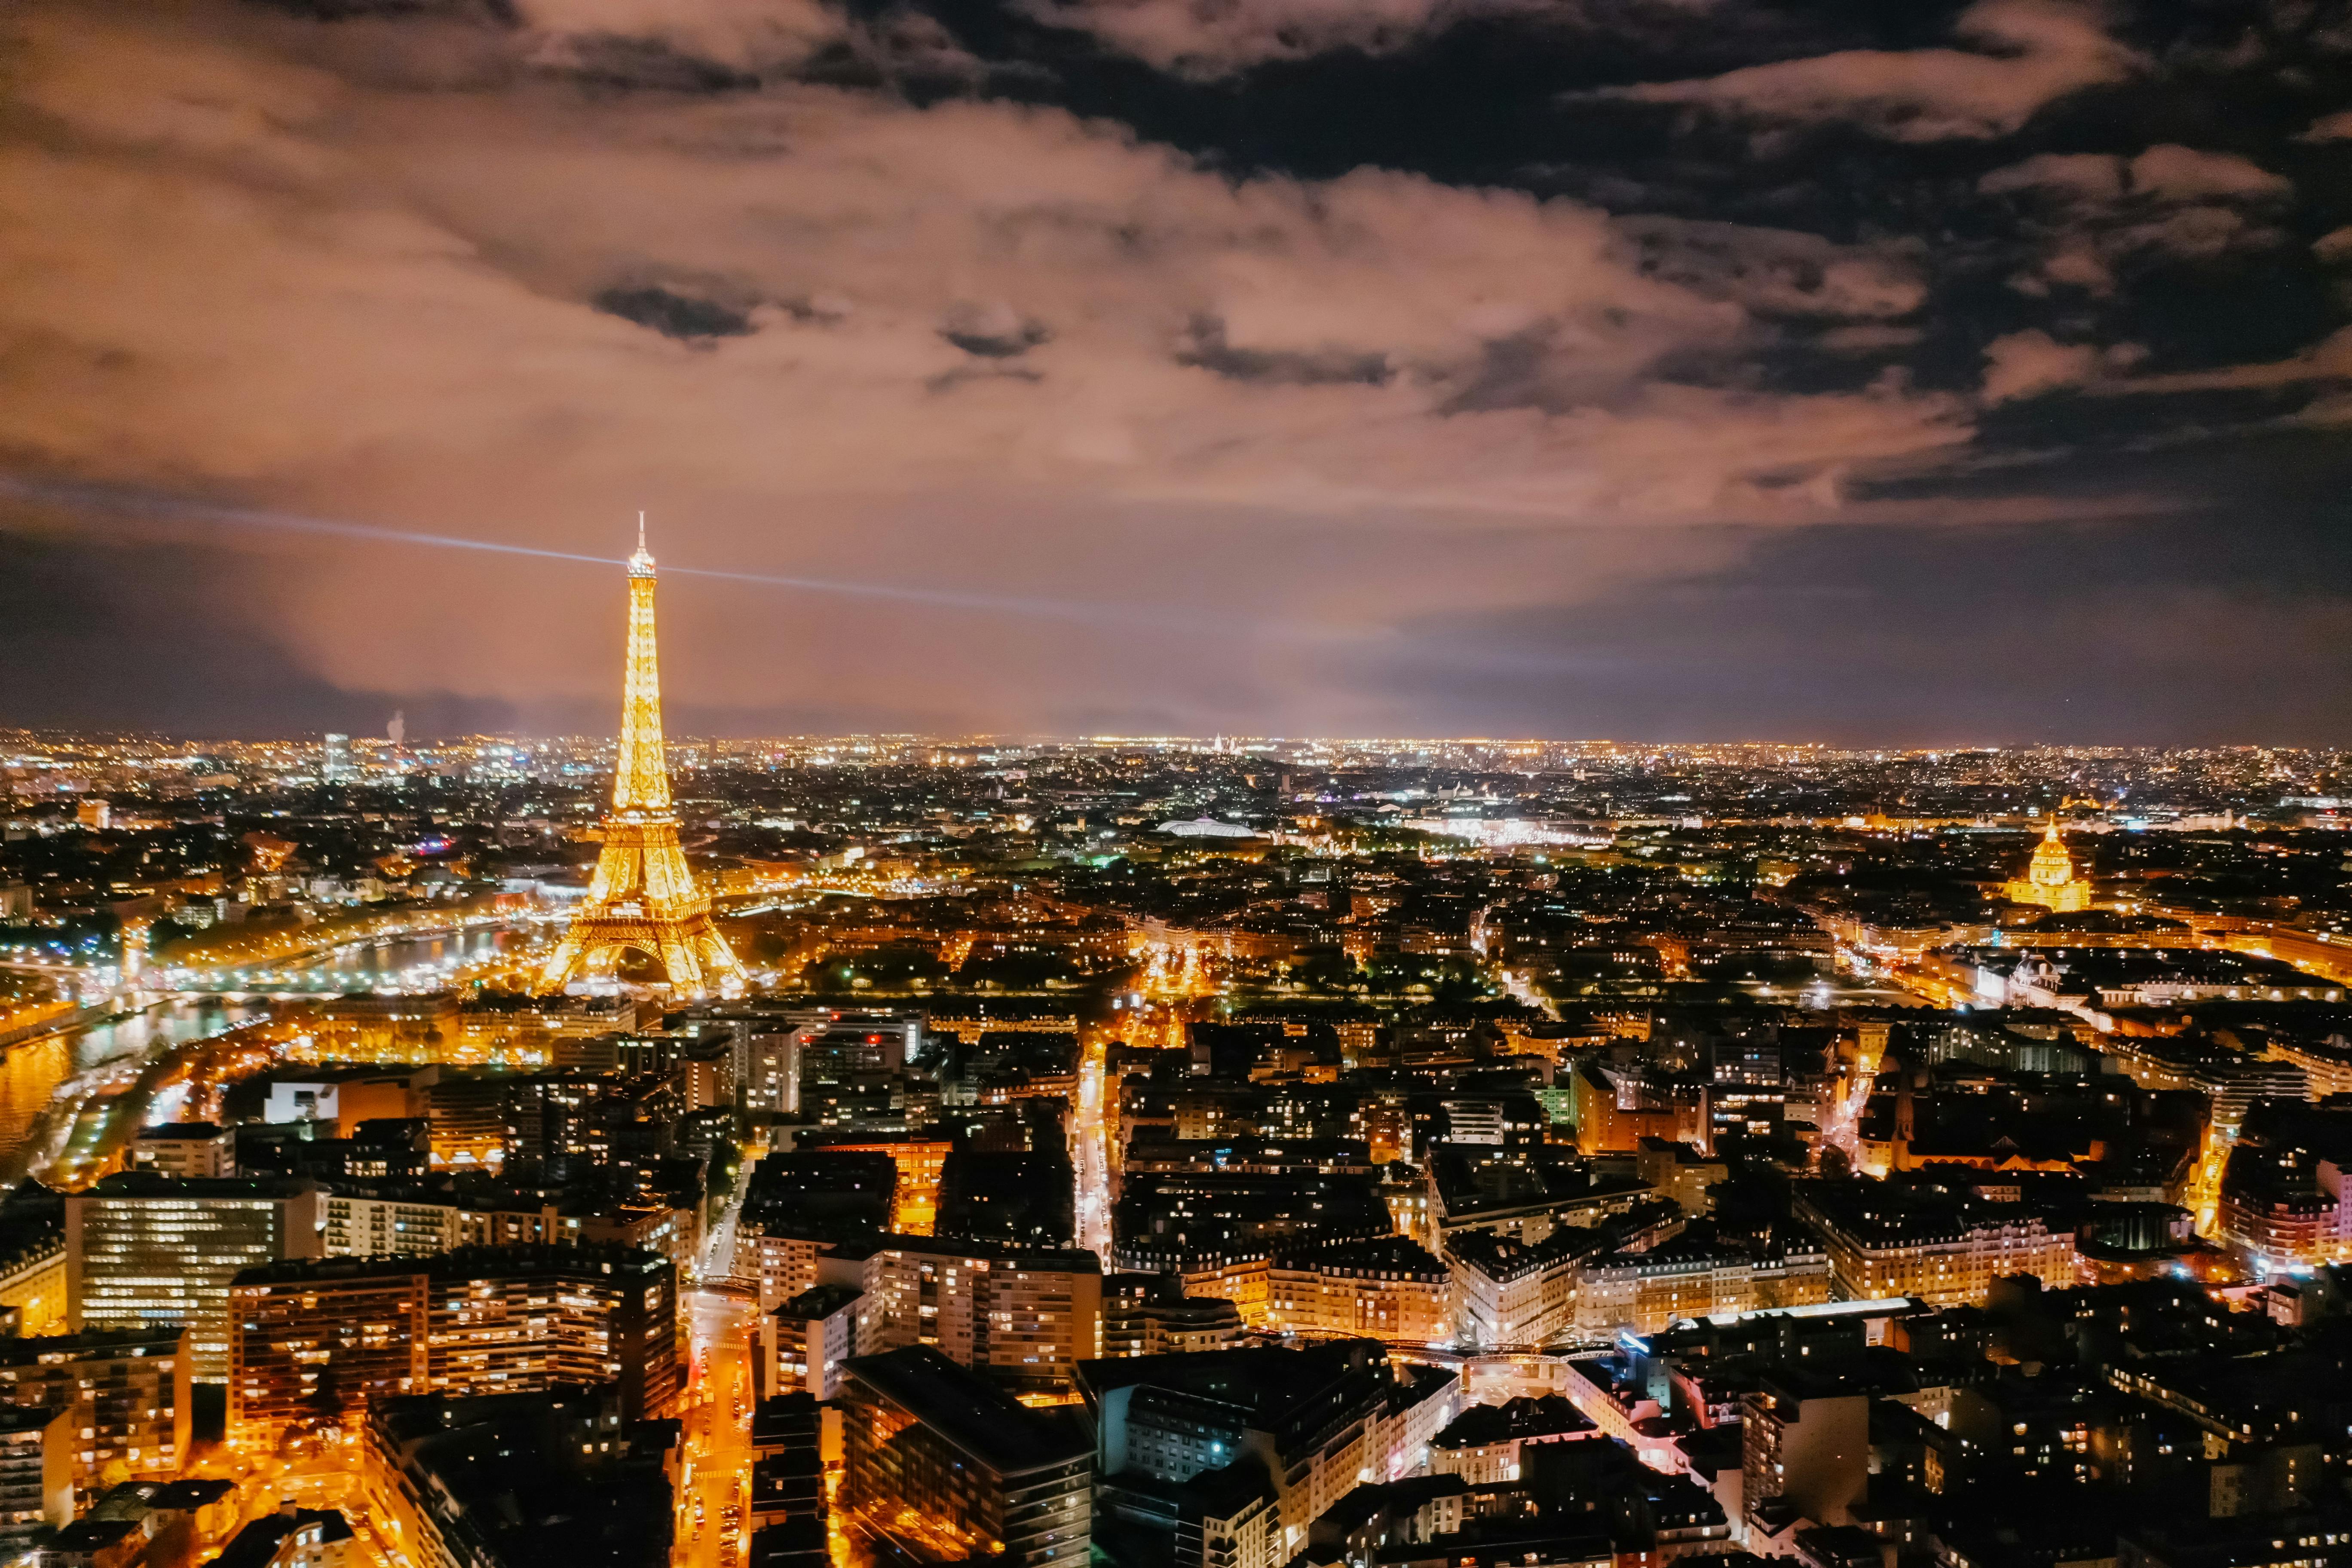 aerial shot of the city of paris during nighttime